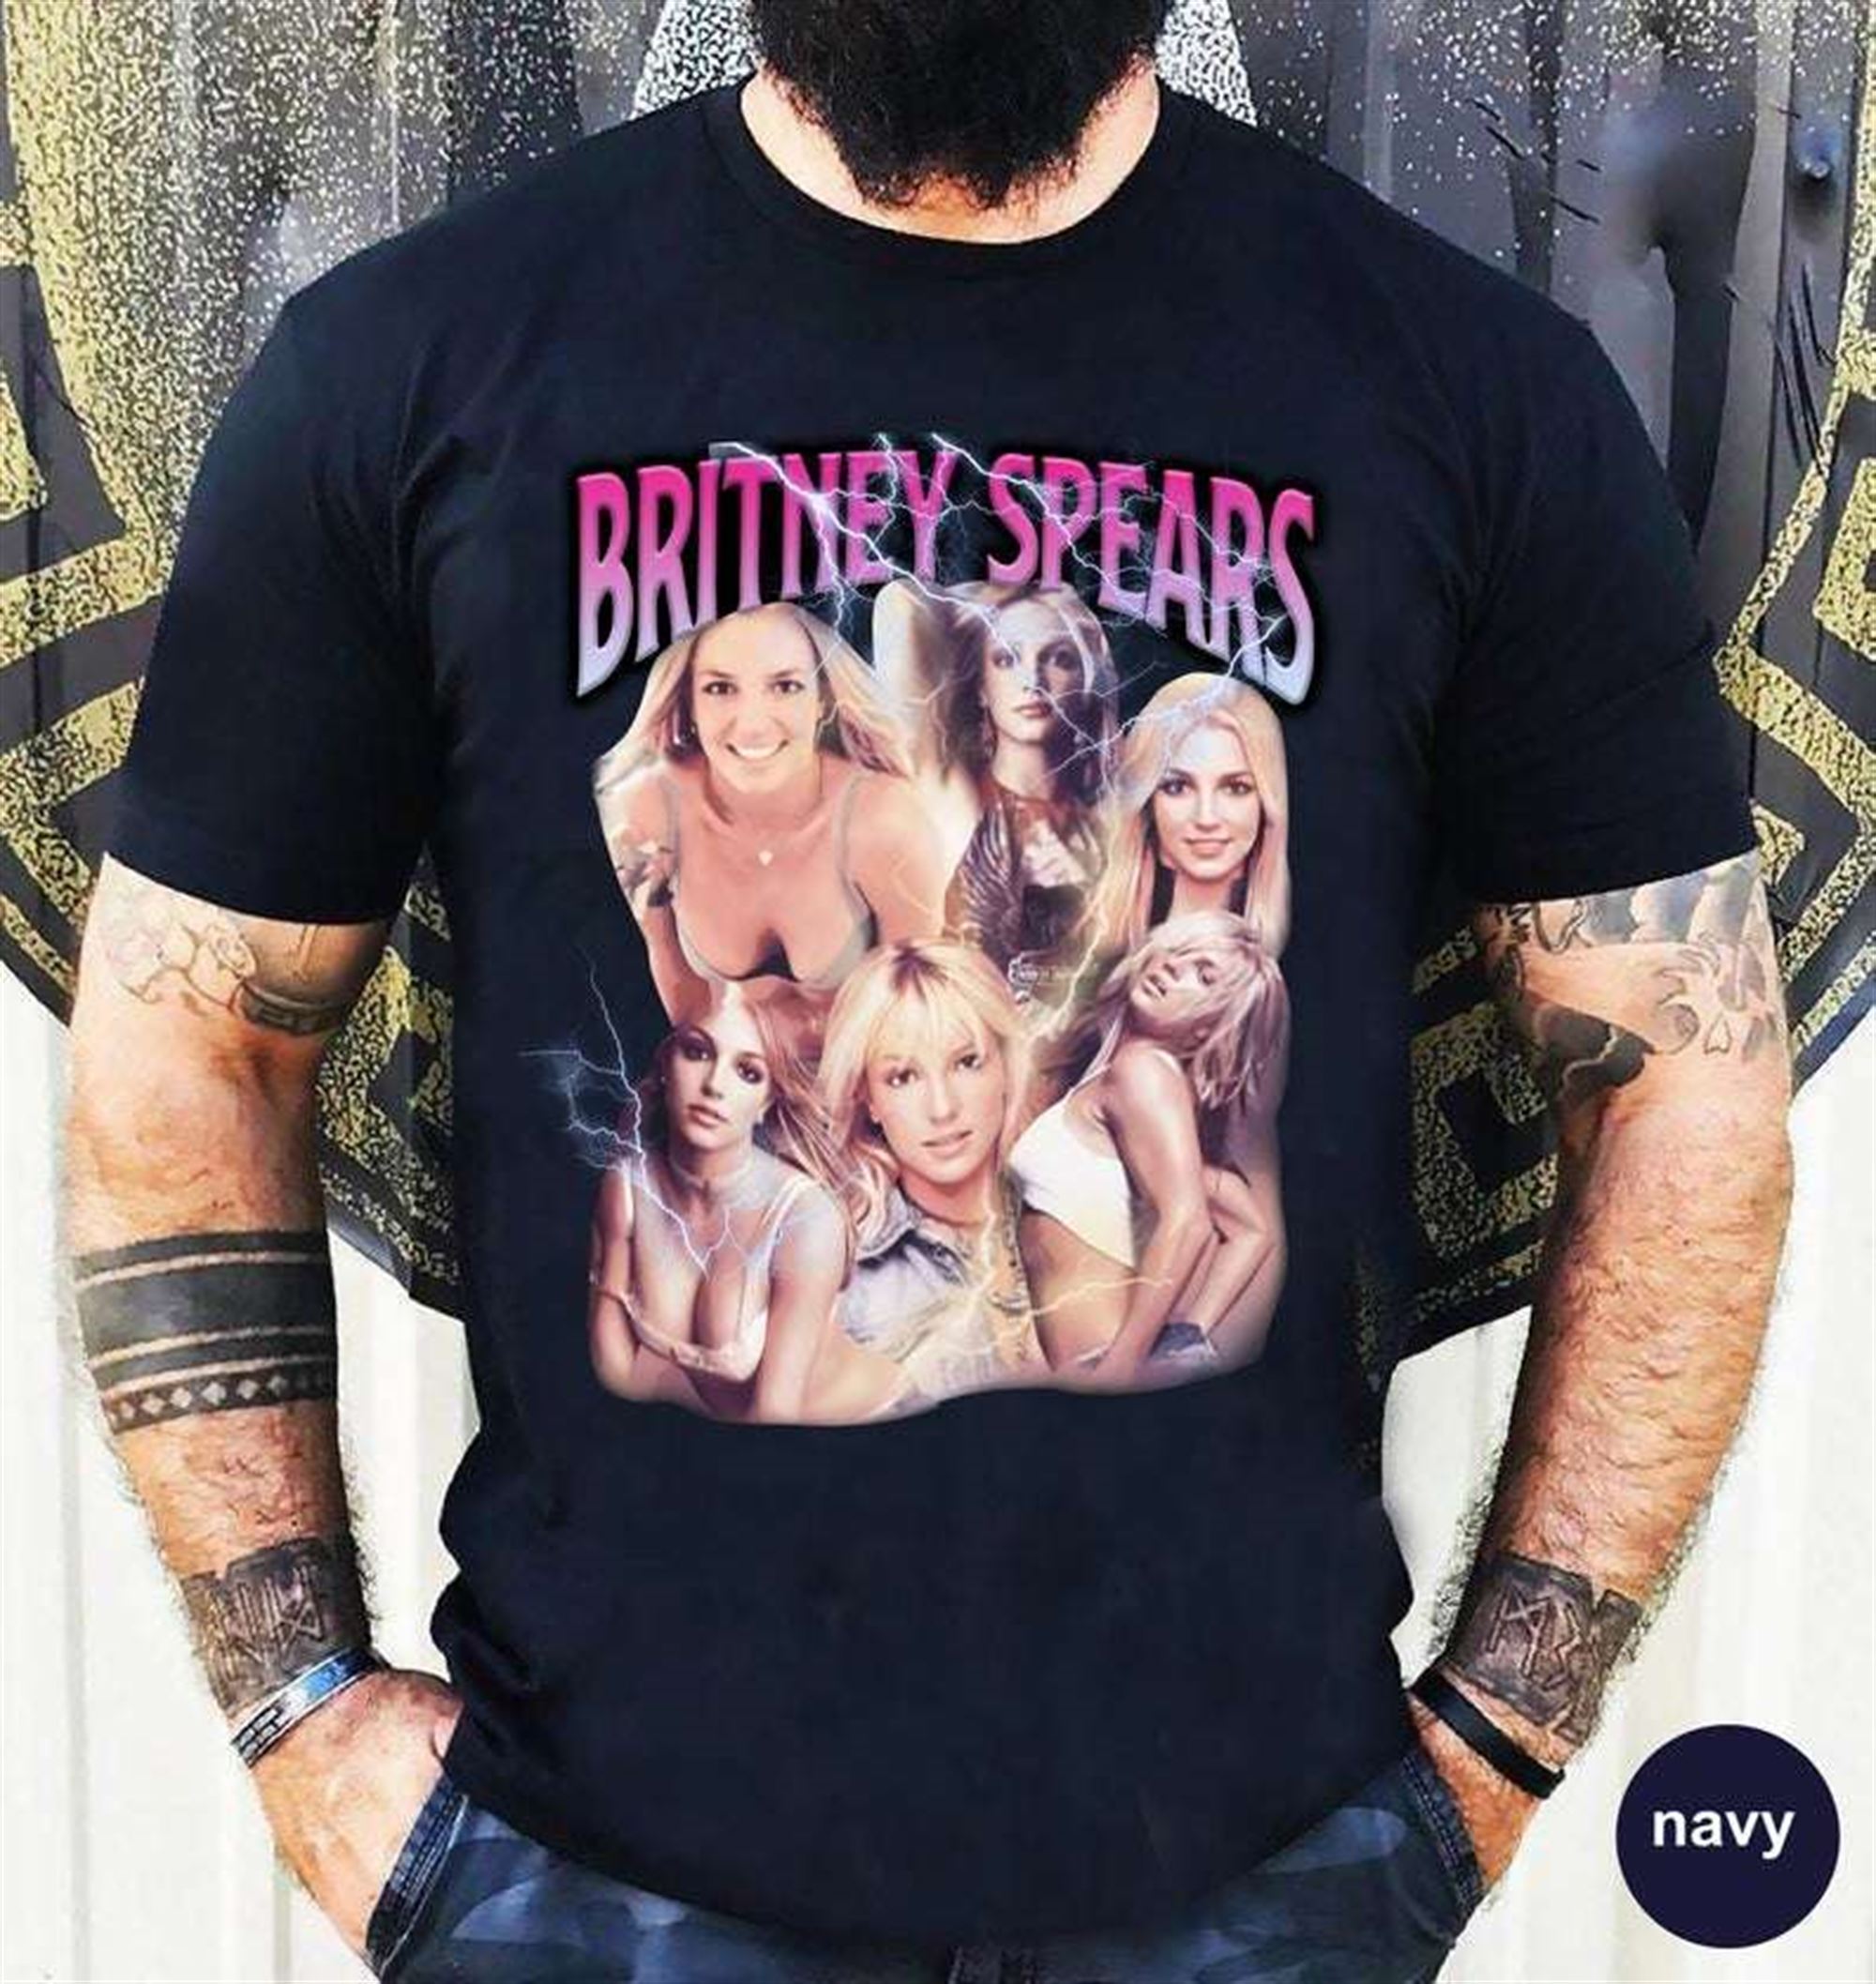 Britney Spears Vintage Classic Unisex T Shirt Plus Size Up To 5xl